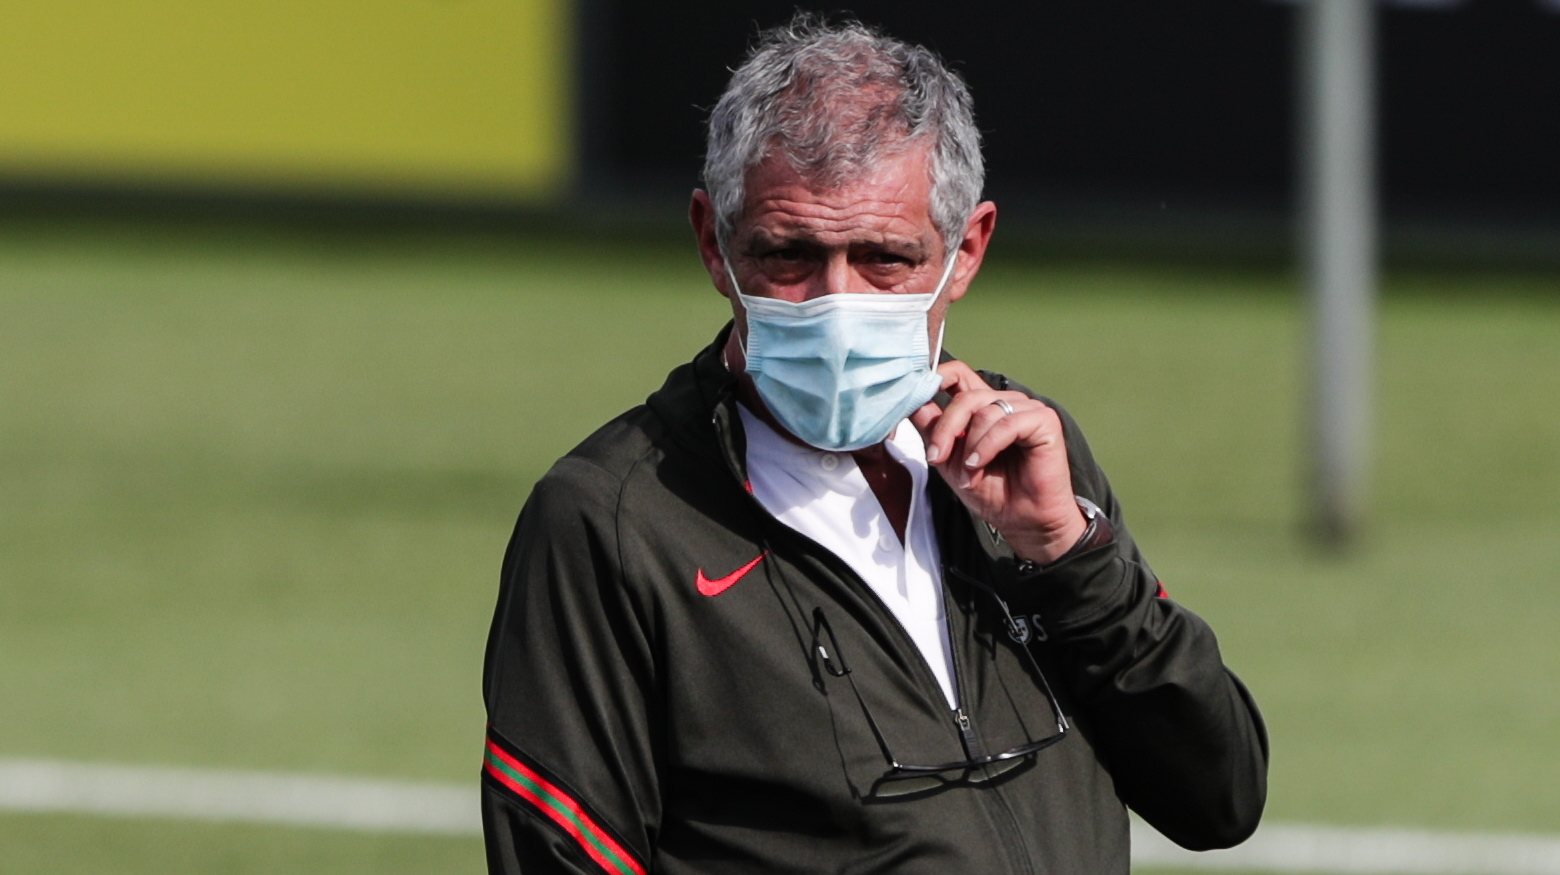 epa09231721 Head coach Fernando Santos reacts during the training session of the Portuguese national soccer team in Oeiras, outskirts of Lisbon, Portugal, 27 May 2021.  EPA/TIAGO PETINGA